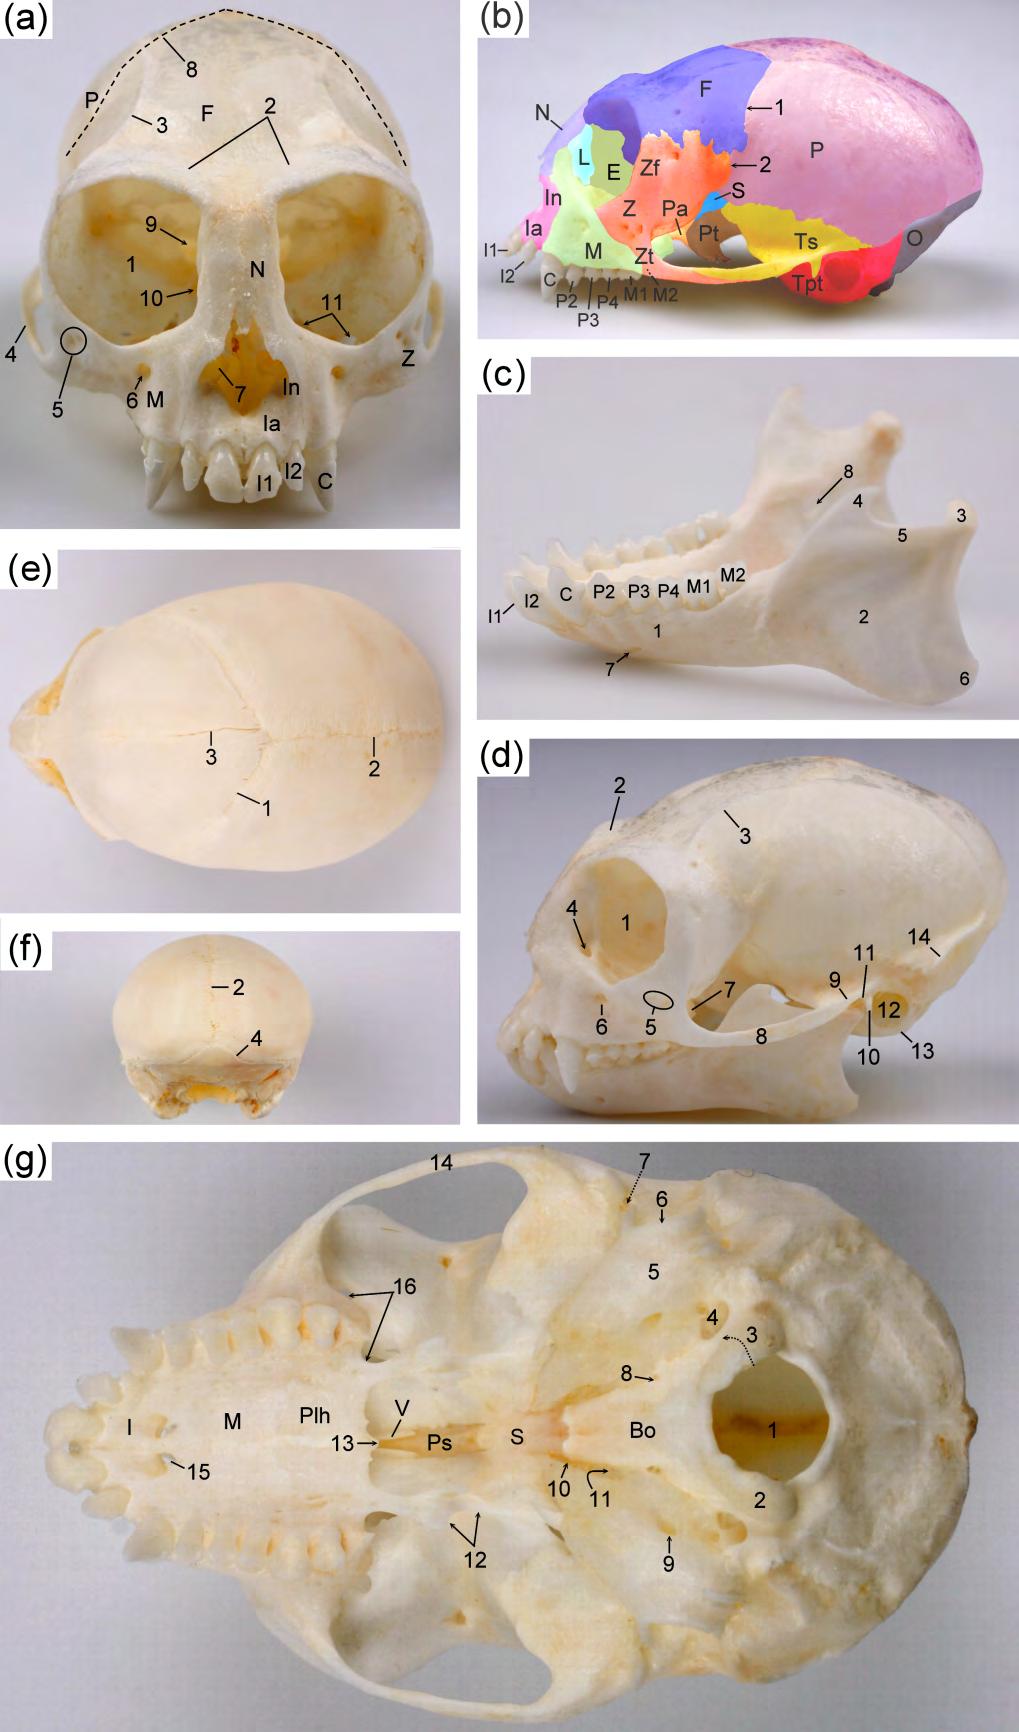 Chapter 5 Figure 1. Skull of the common marmoset.